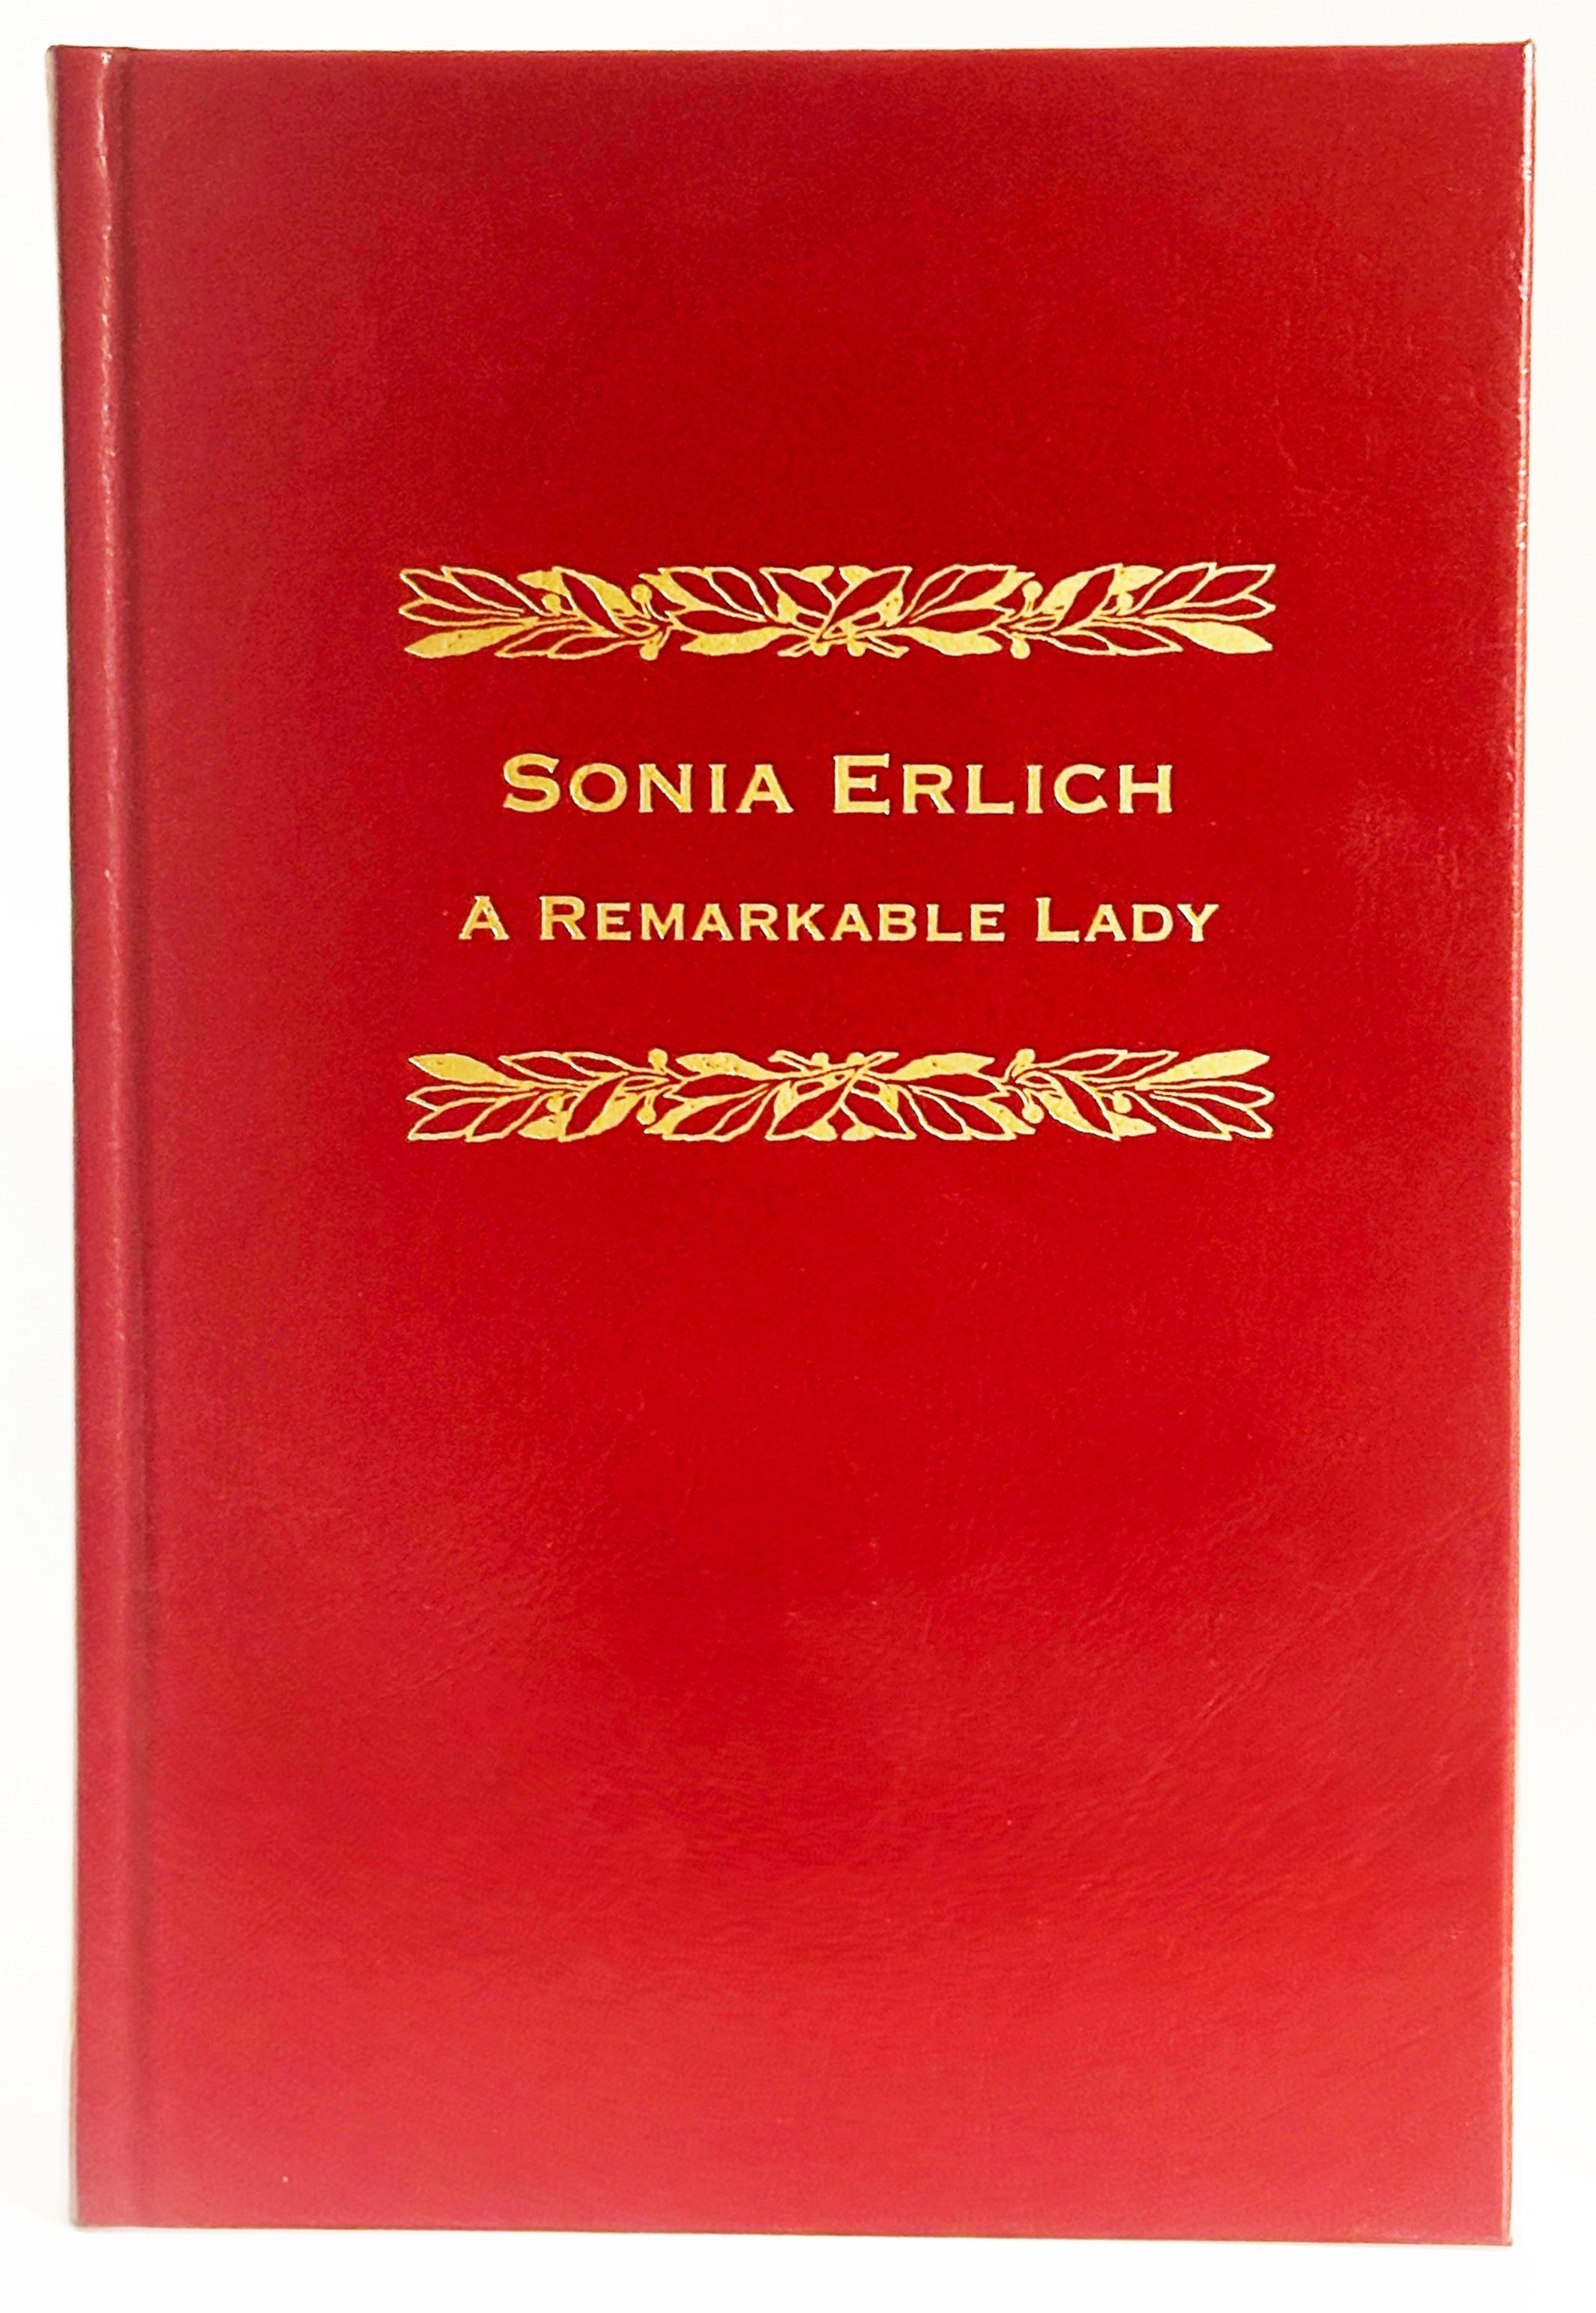 Sonia Erlich: A Remarkable Lady (2016)